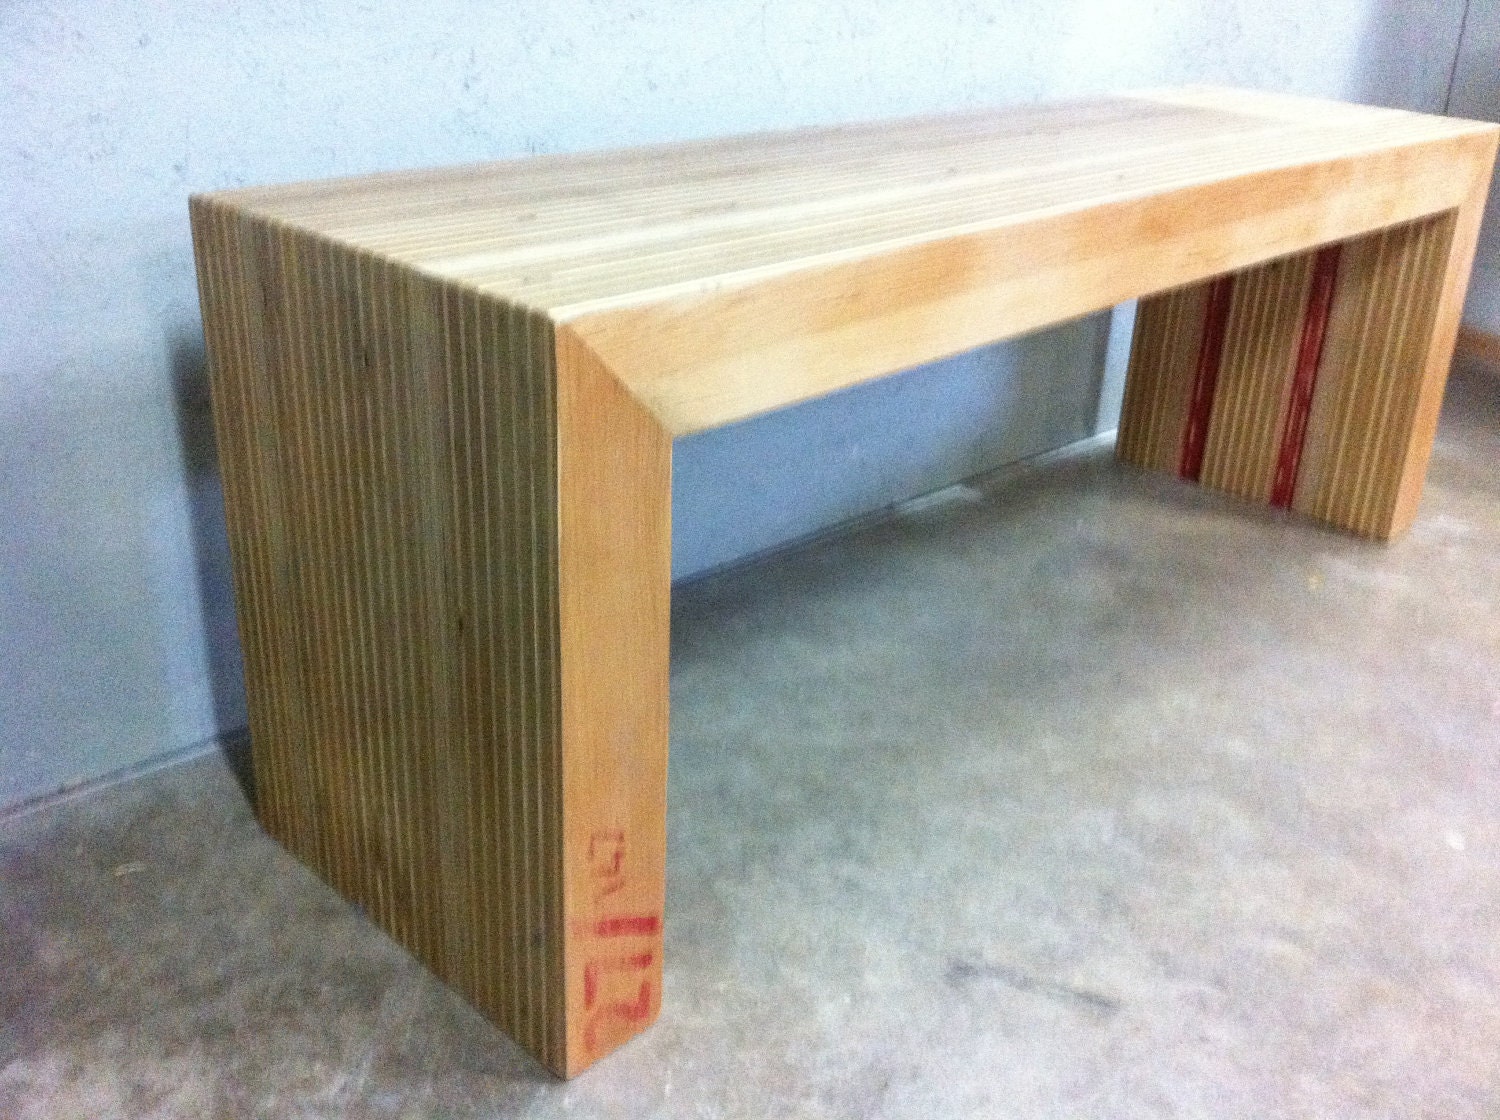 Items similar to 27/147 - recycled plywood bench on Etsy